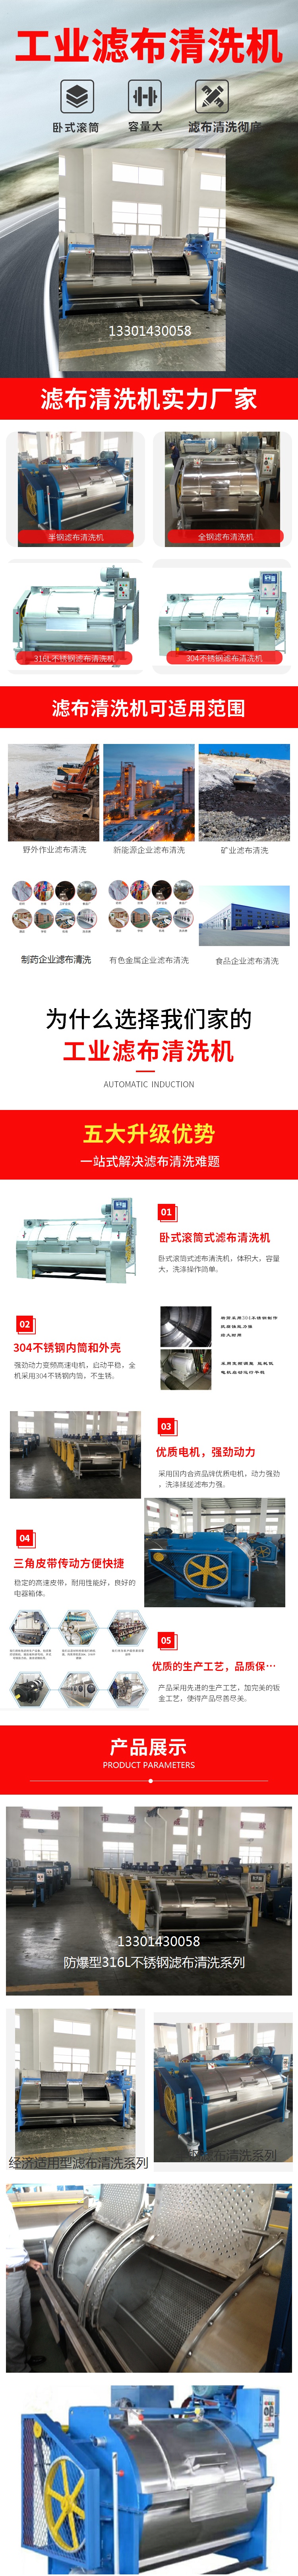 Industrial filter cloth cleaning machine 150kg Industrial washing machine manufacturer direct supply